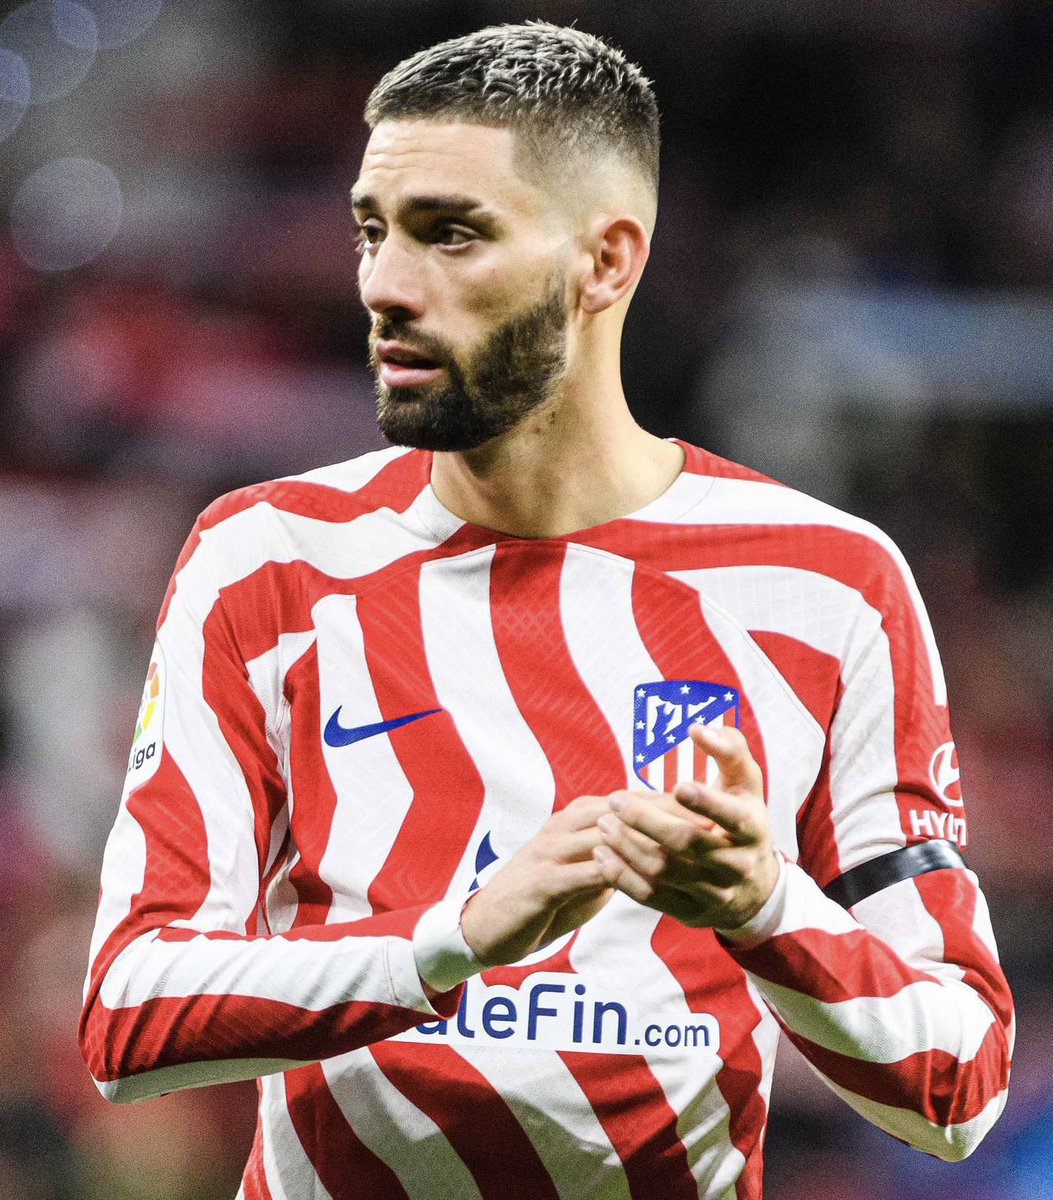 🚨🎖️| Barcelona have reached a total consensus regarding the signing of Carrasco. The player’s recent performances in the league convinced the club to go for him. Even so, it will not be easy and there are still no new contacts with Atlético. [@tjuanmarti] #fcblive 🇧🇪